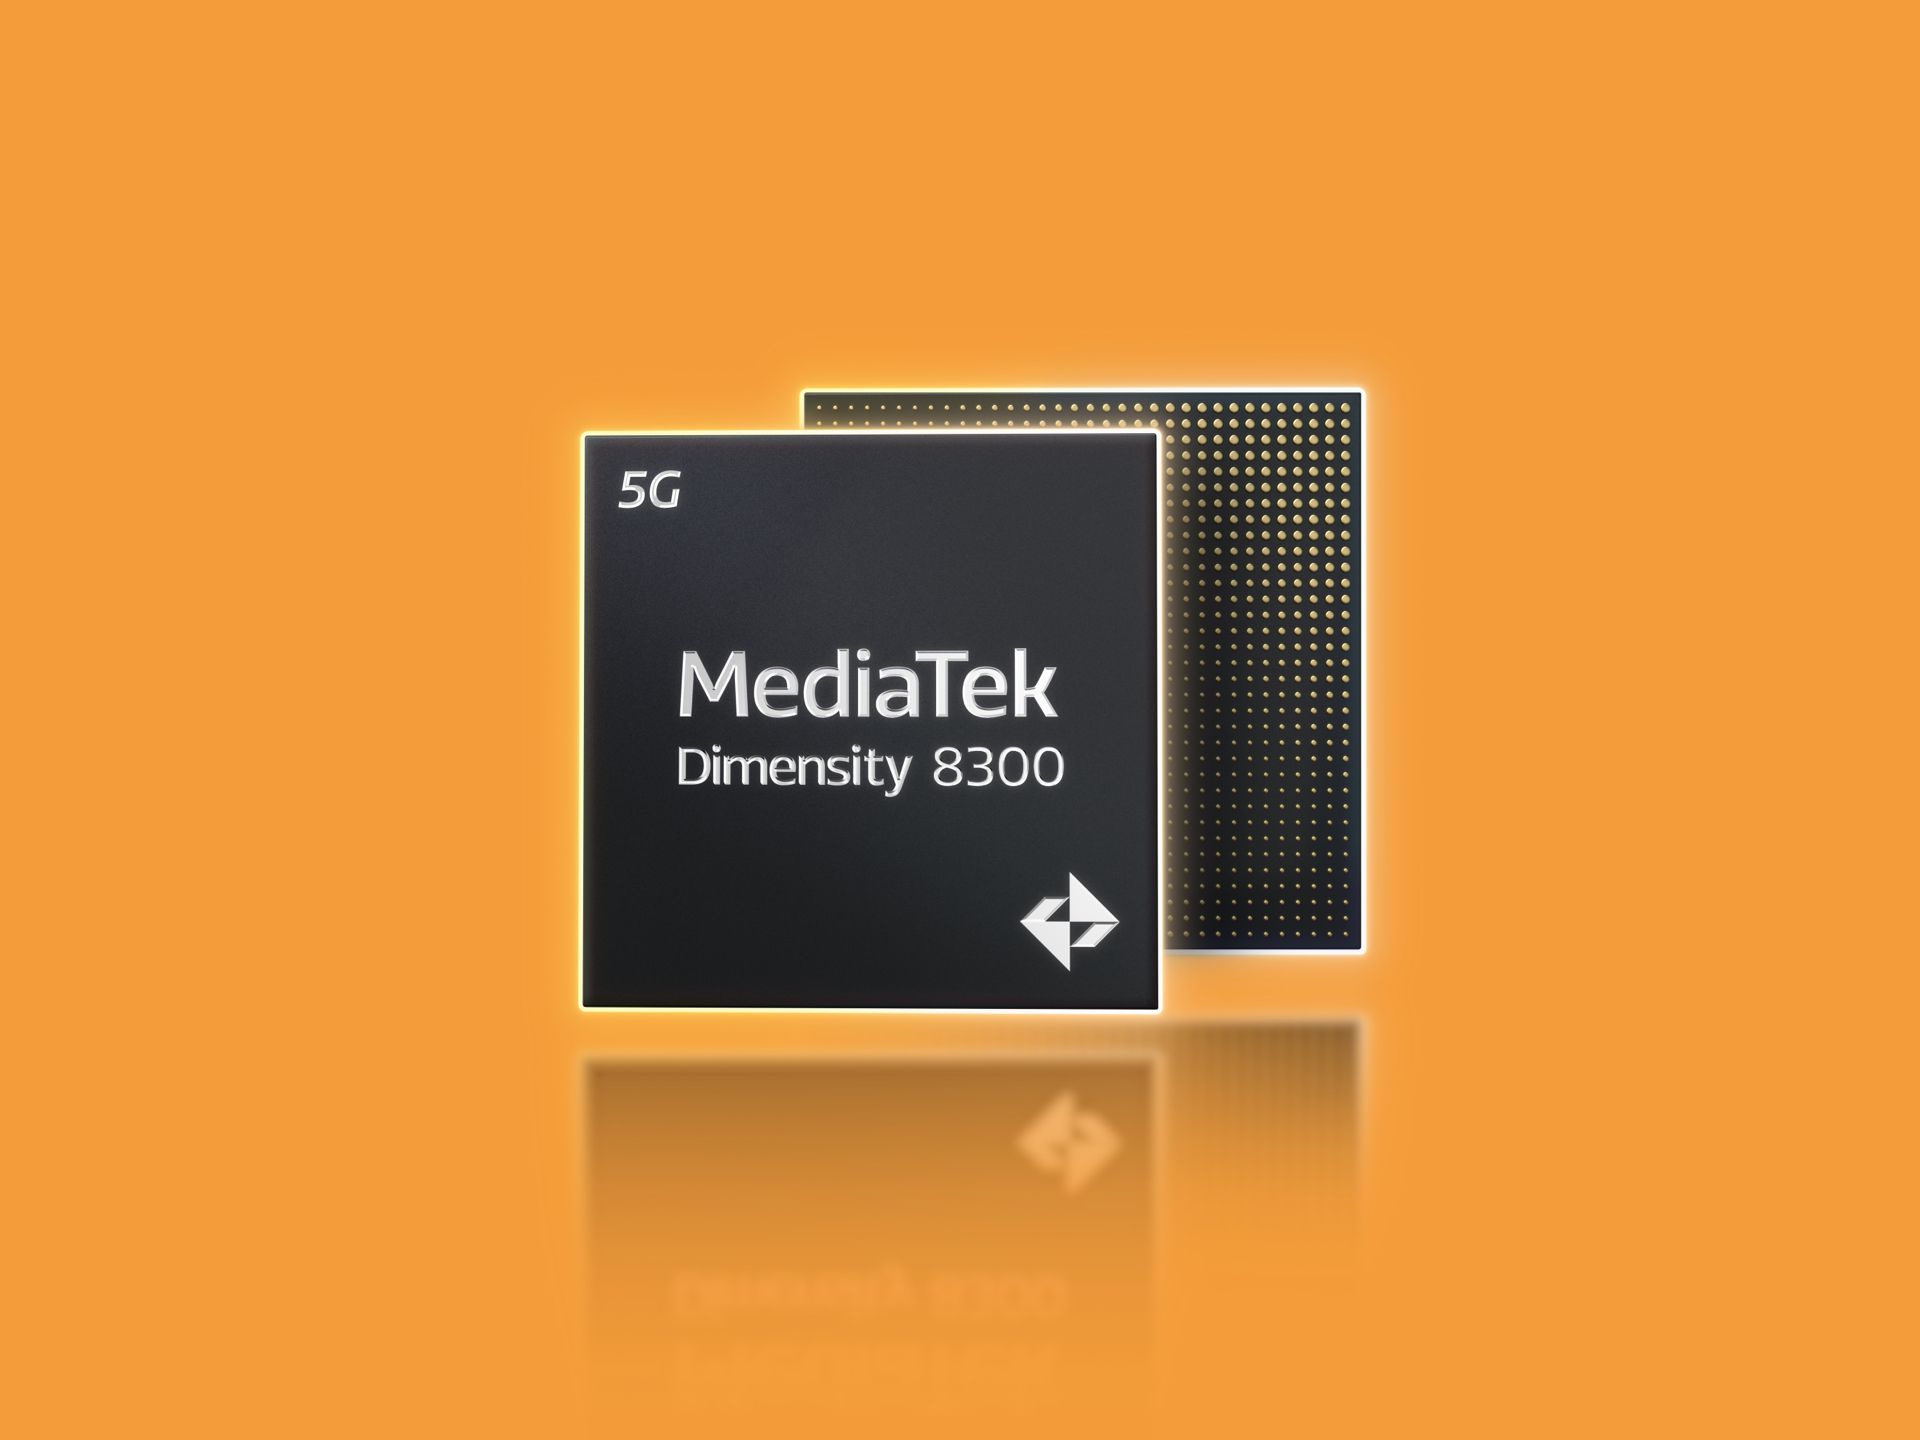 MediaTek debuts Dimensity 8300 with fast performance and AI-focused features